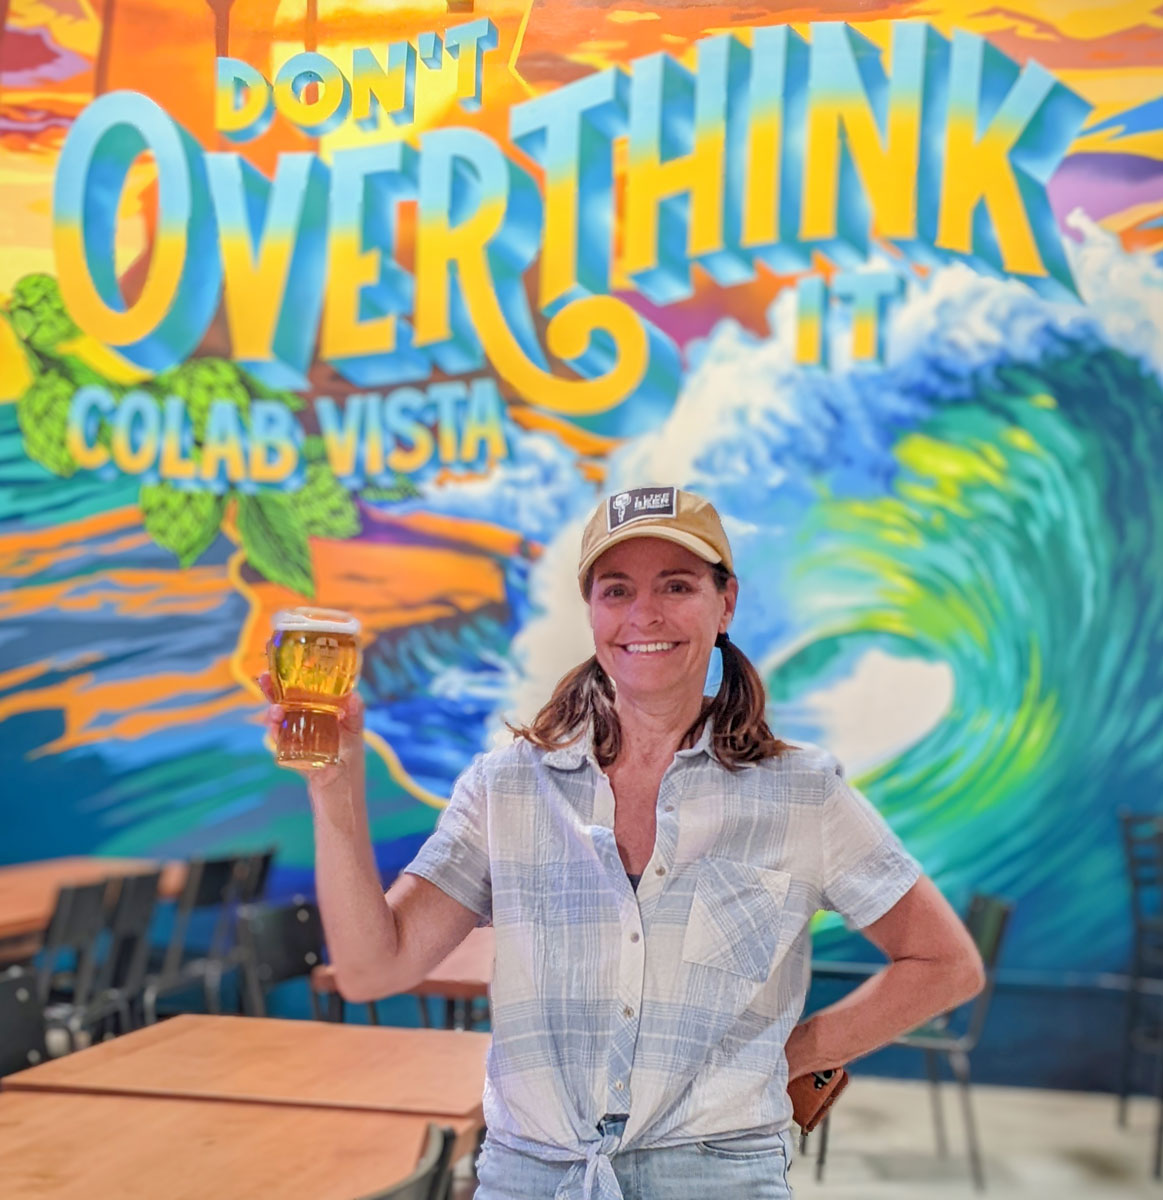 Julie Spanier enjoying the experience at Vista's CoLab Public House experience. Photo by Jeff Spanier